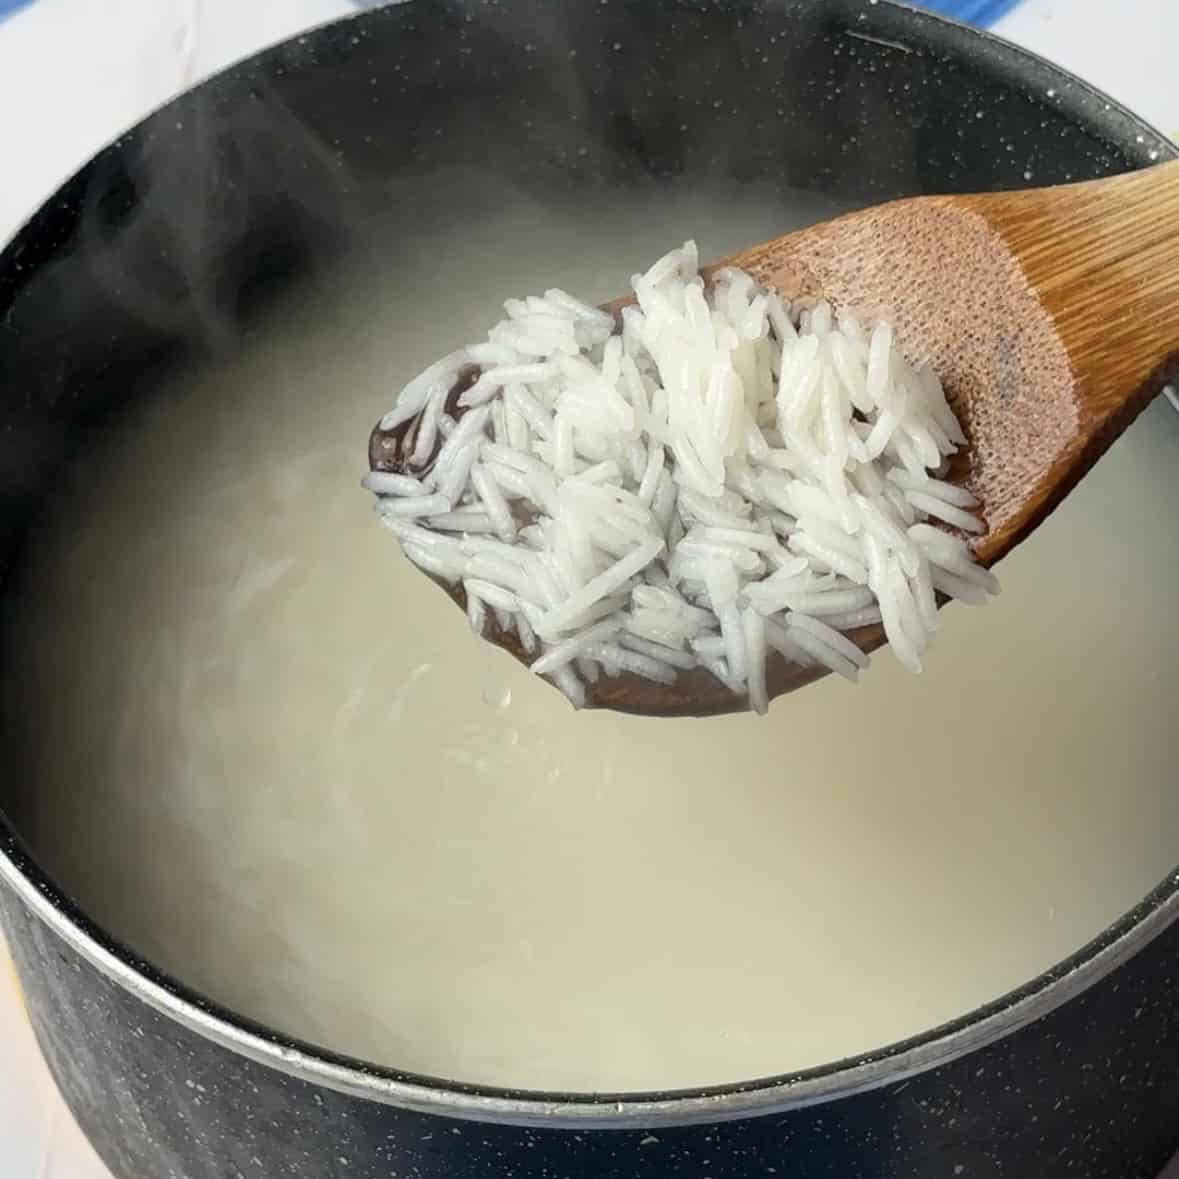 boiled rice in a pot and a wooden spoon with some boiled rice grains